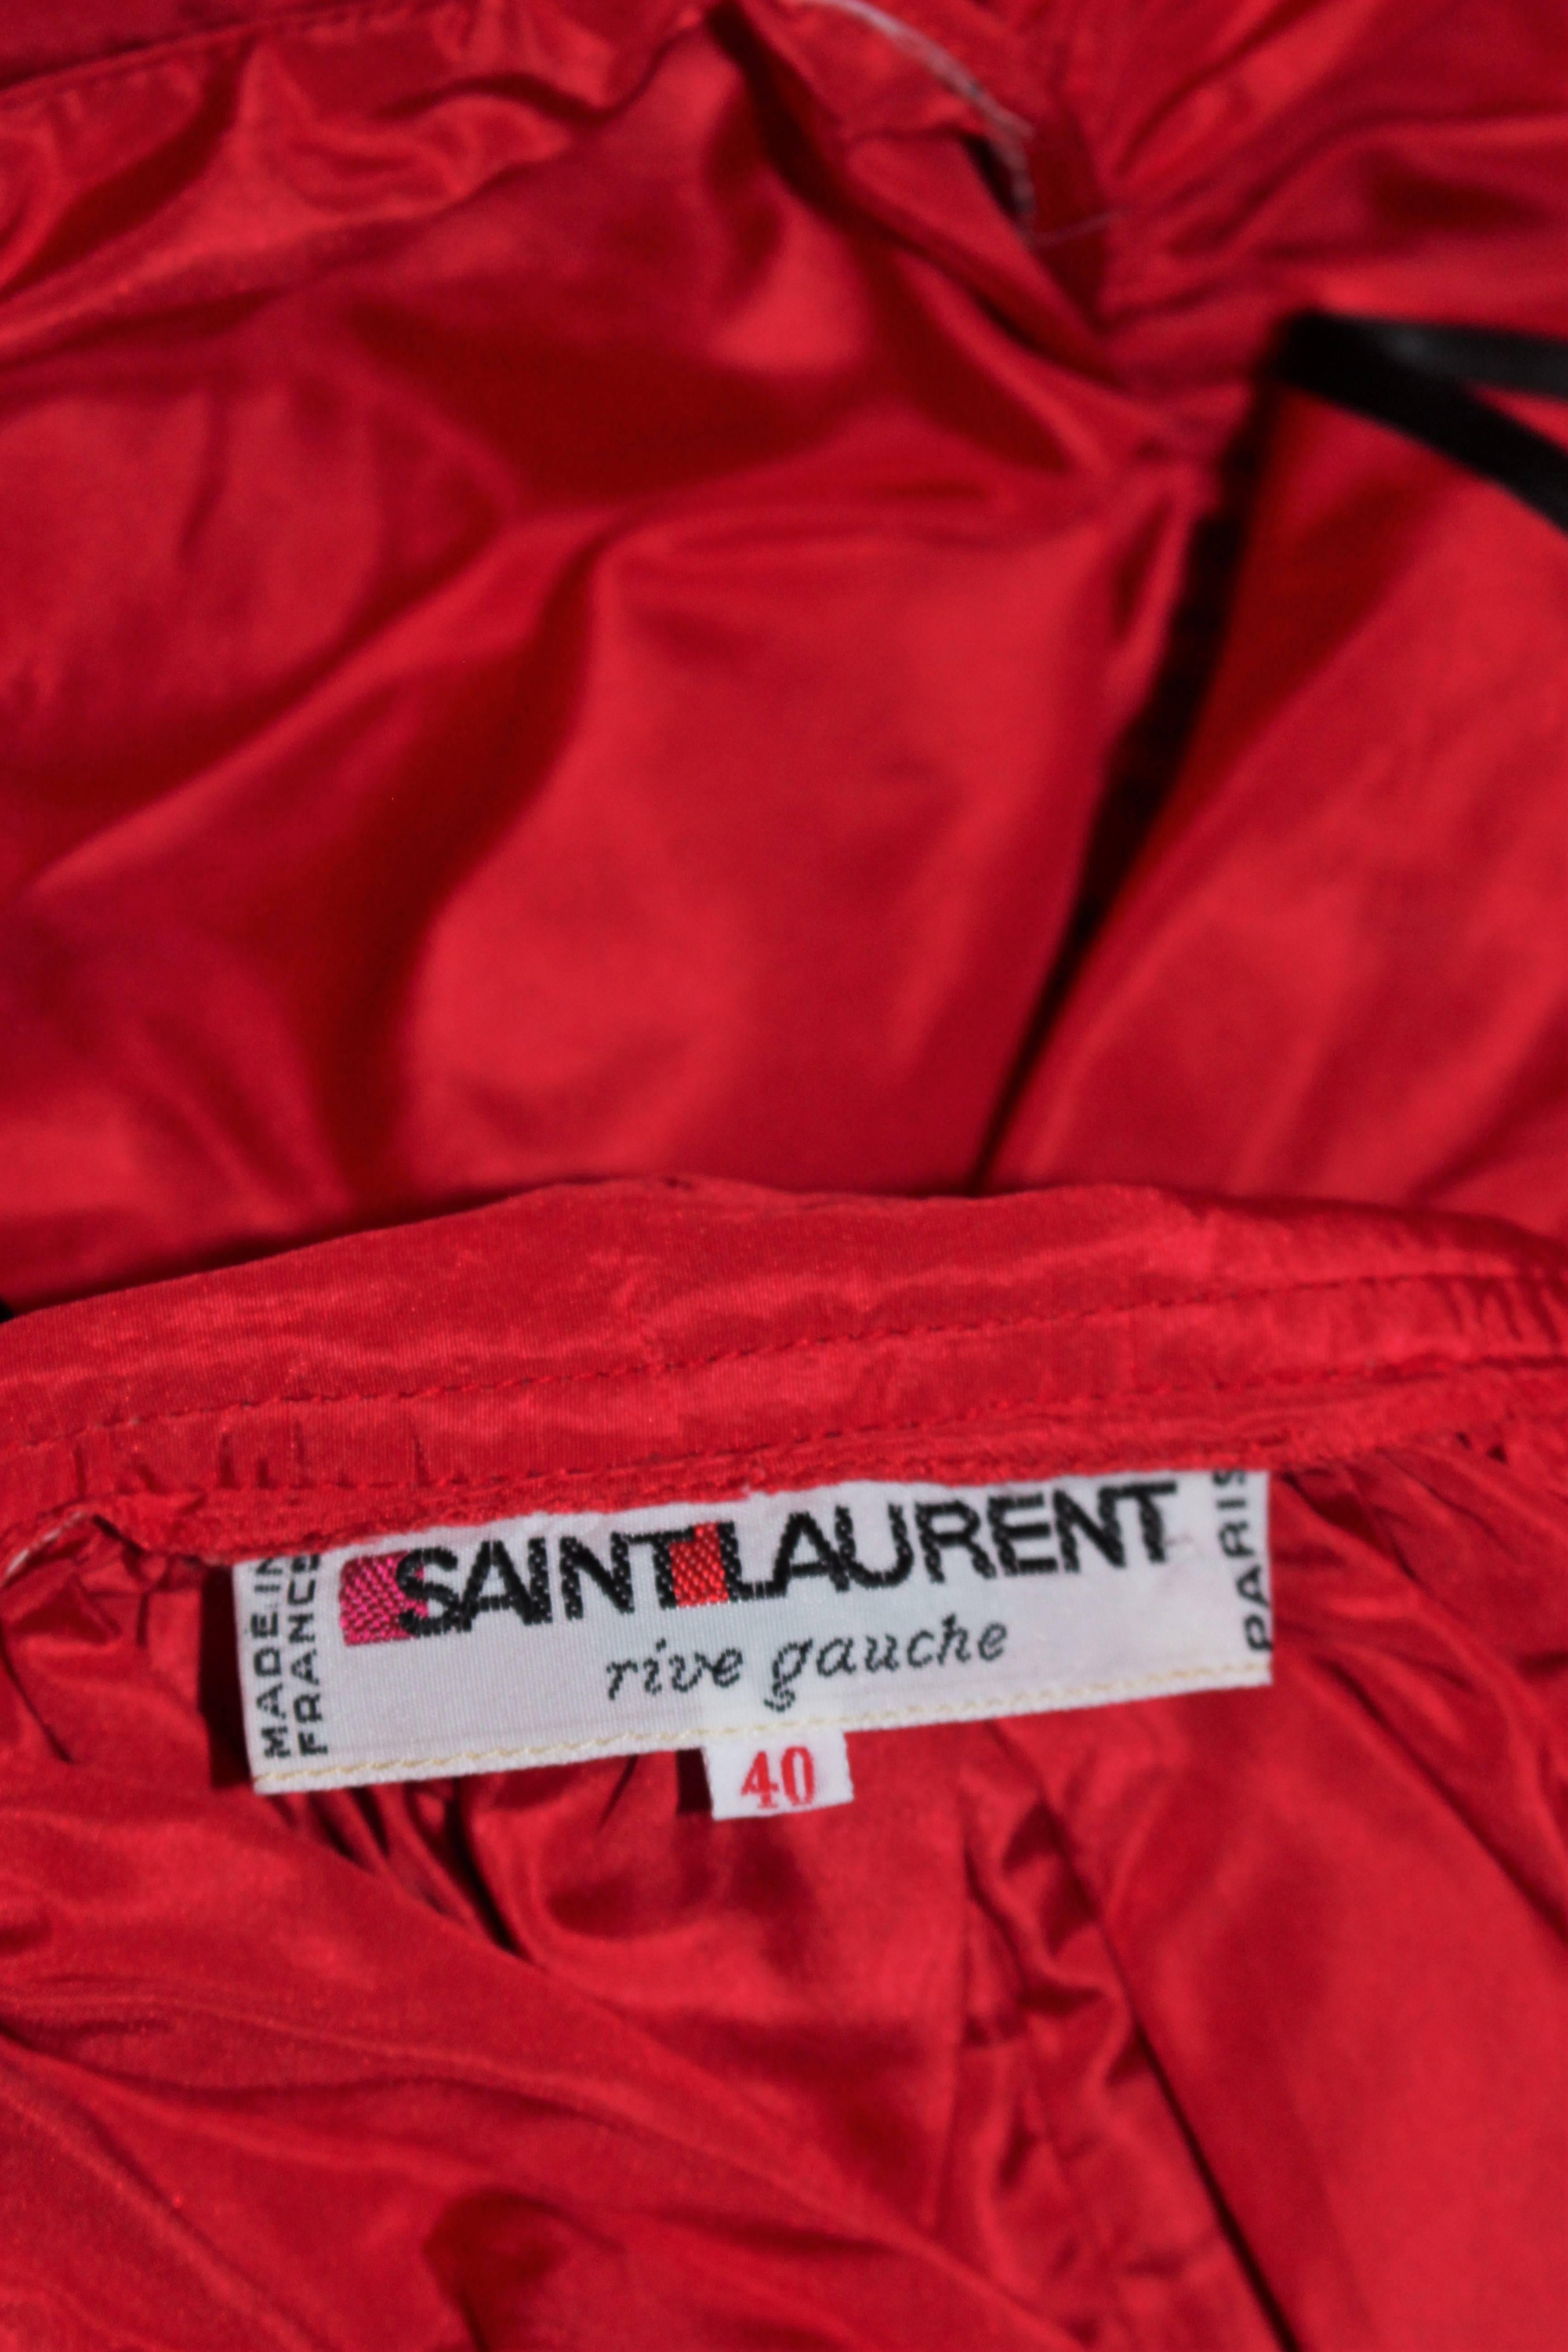 YVES SAINT LAURENT 1970's Red Satin Ruffled Ensemble with Black Trim Size 40 For Sale 5